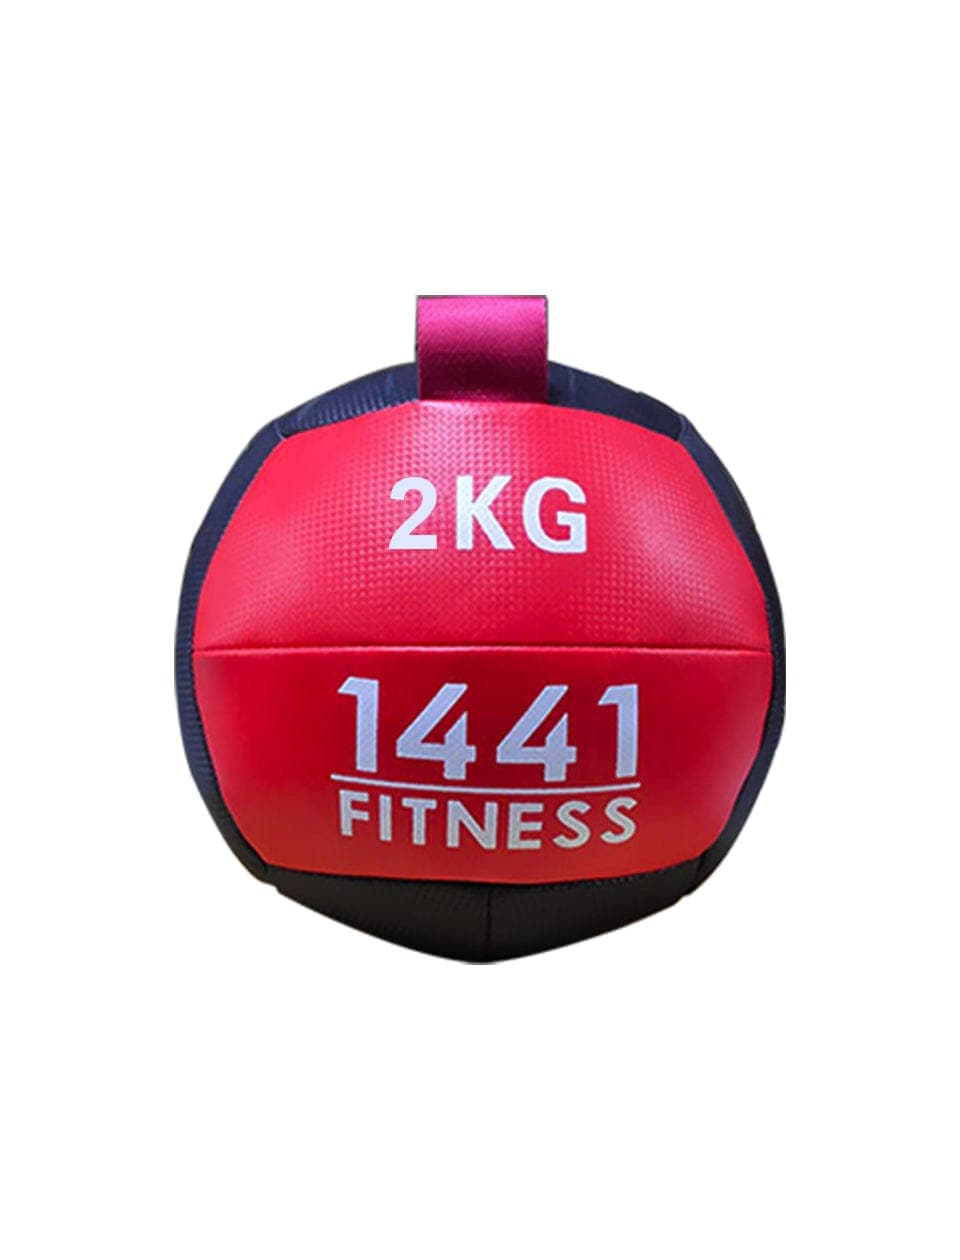 PRSAE Crossfit 2 Kg 1441 Fitness Wall Ball for Crossfit Exercises - 1 Kg to 15 Kg